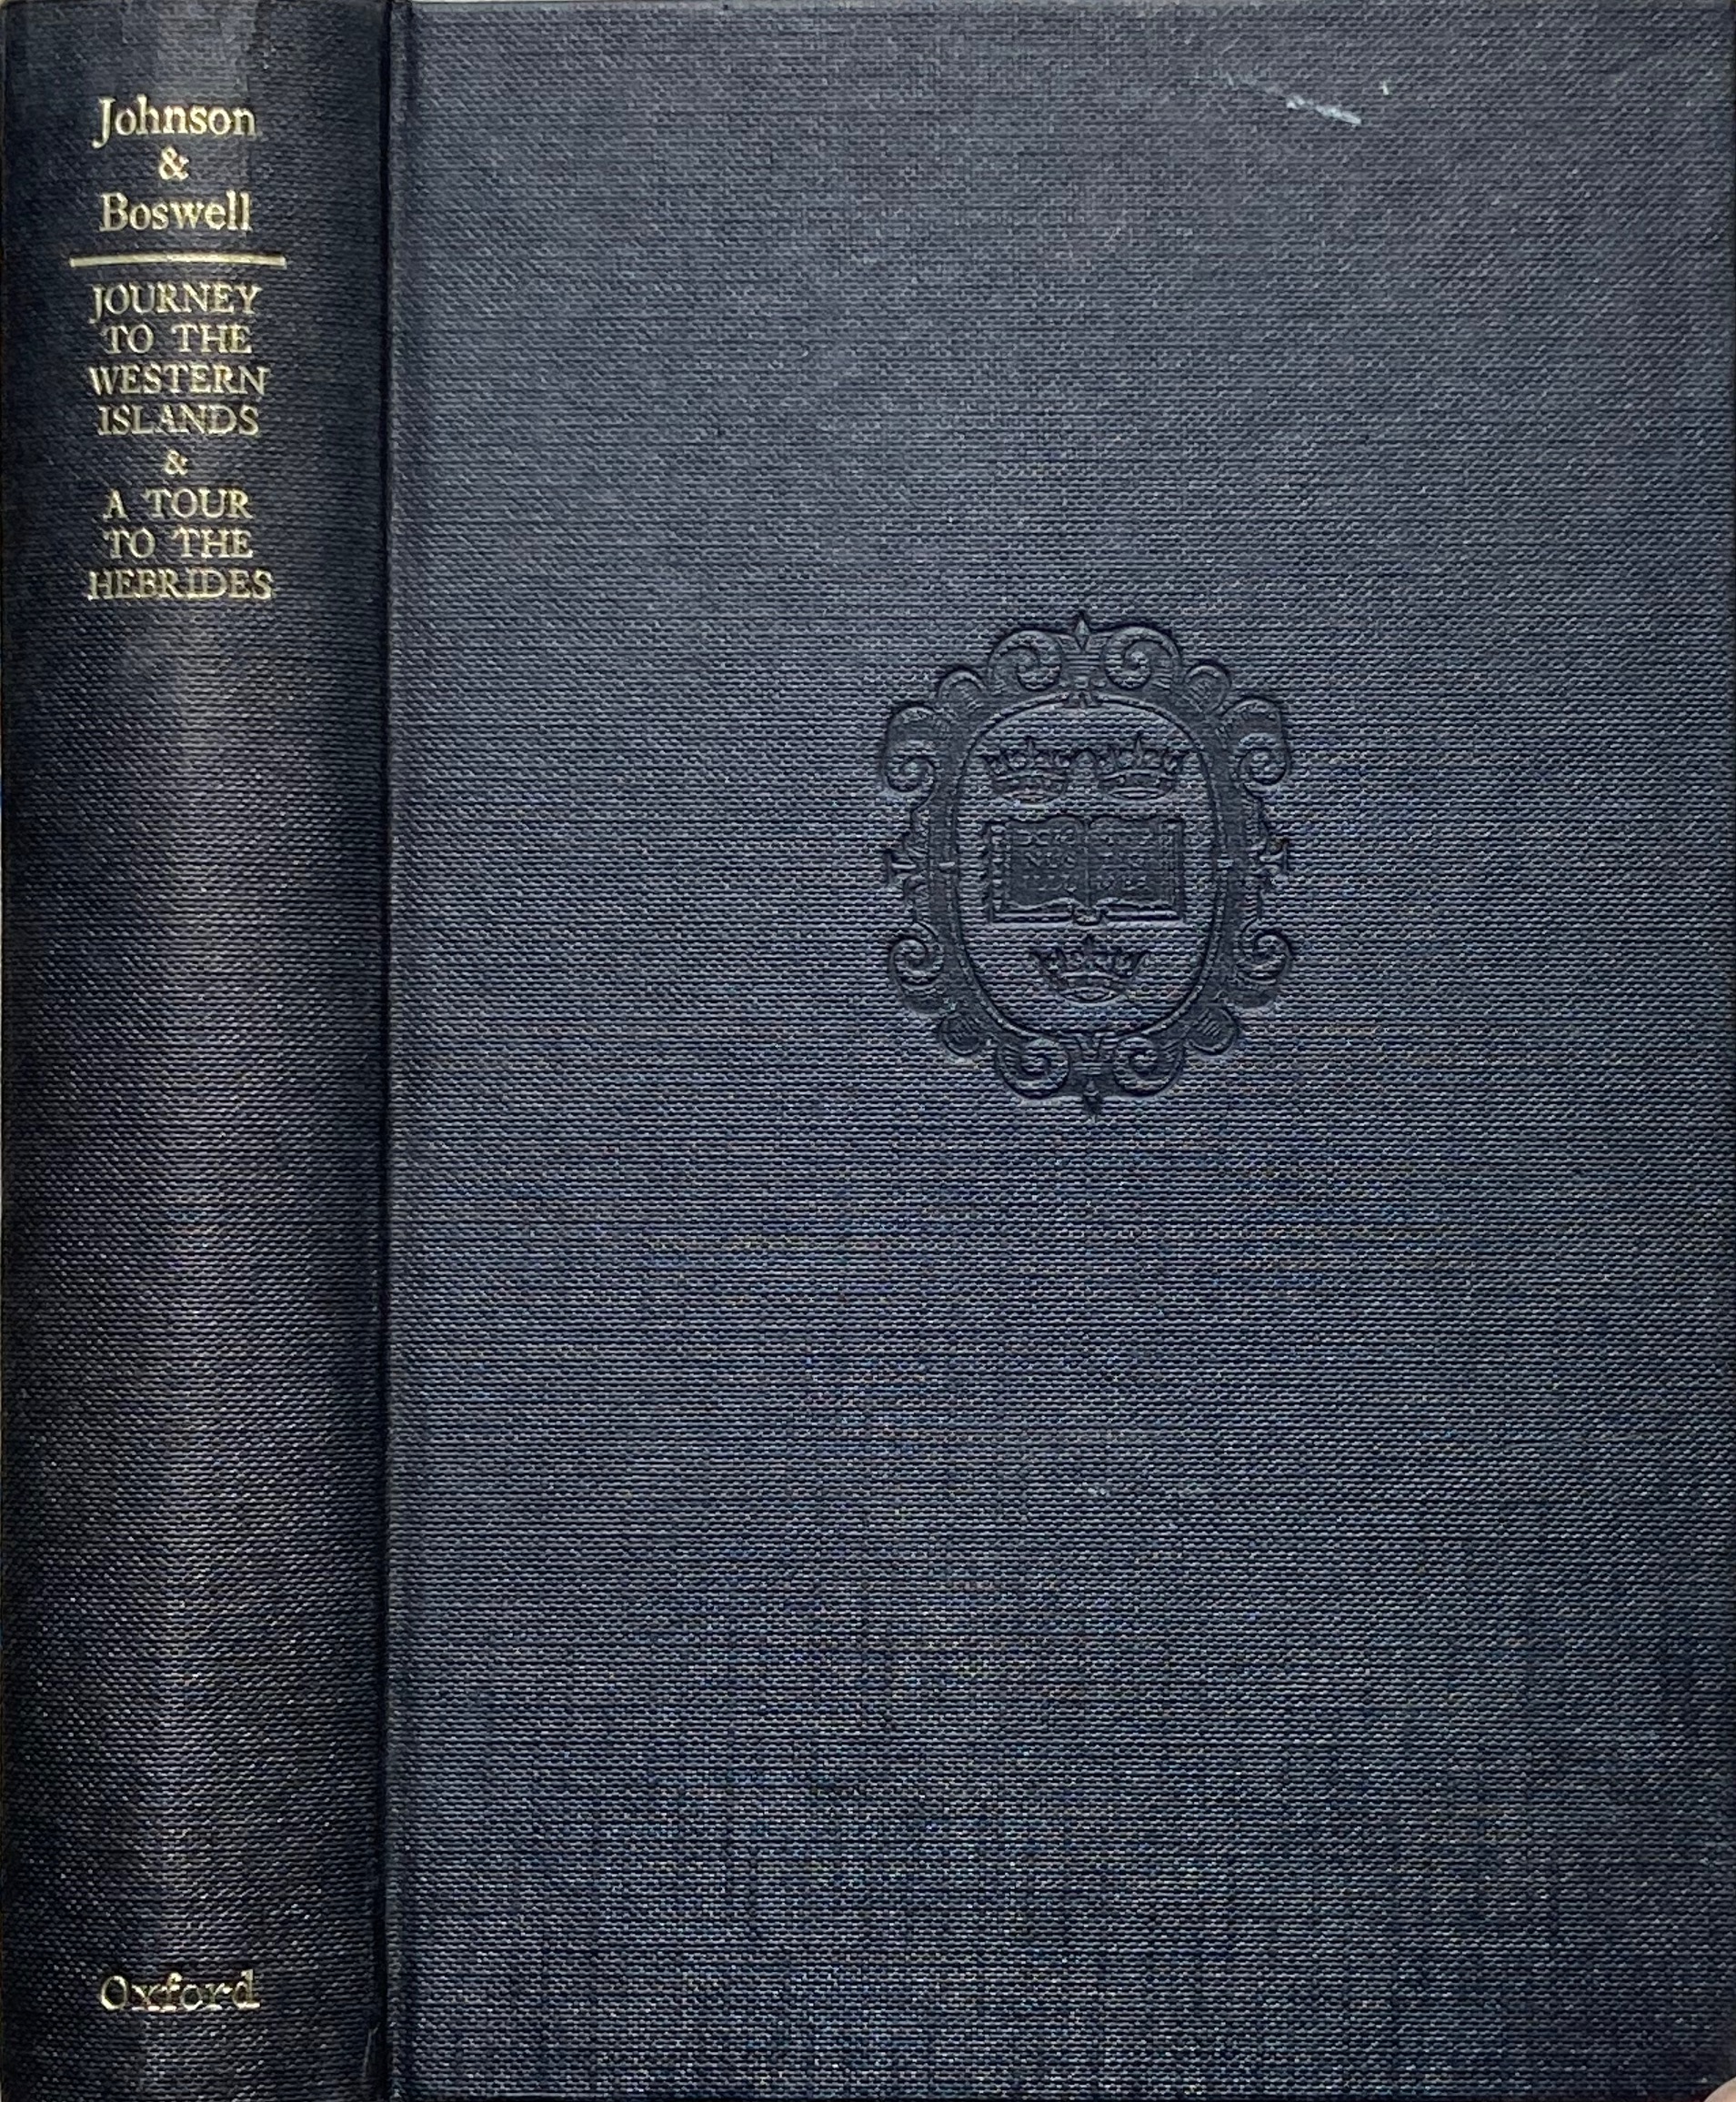 Johnson's journey to the western islands of Scotland and Boswell's journal of a tour to the Hebrides with Samuel Johnson, Ll.D. - Chapman, R.W. (ed.) Johnson, S, Boswell, J.